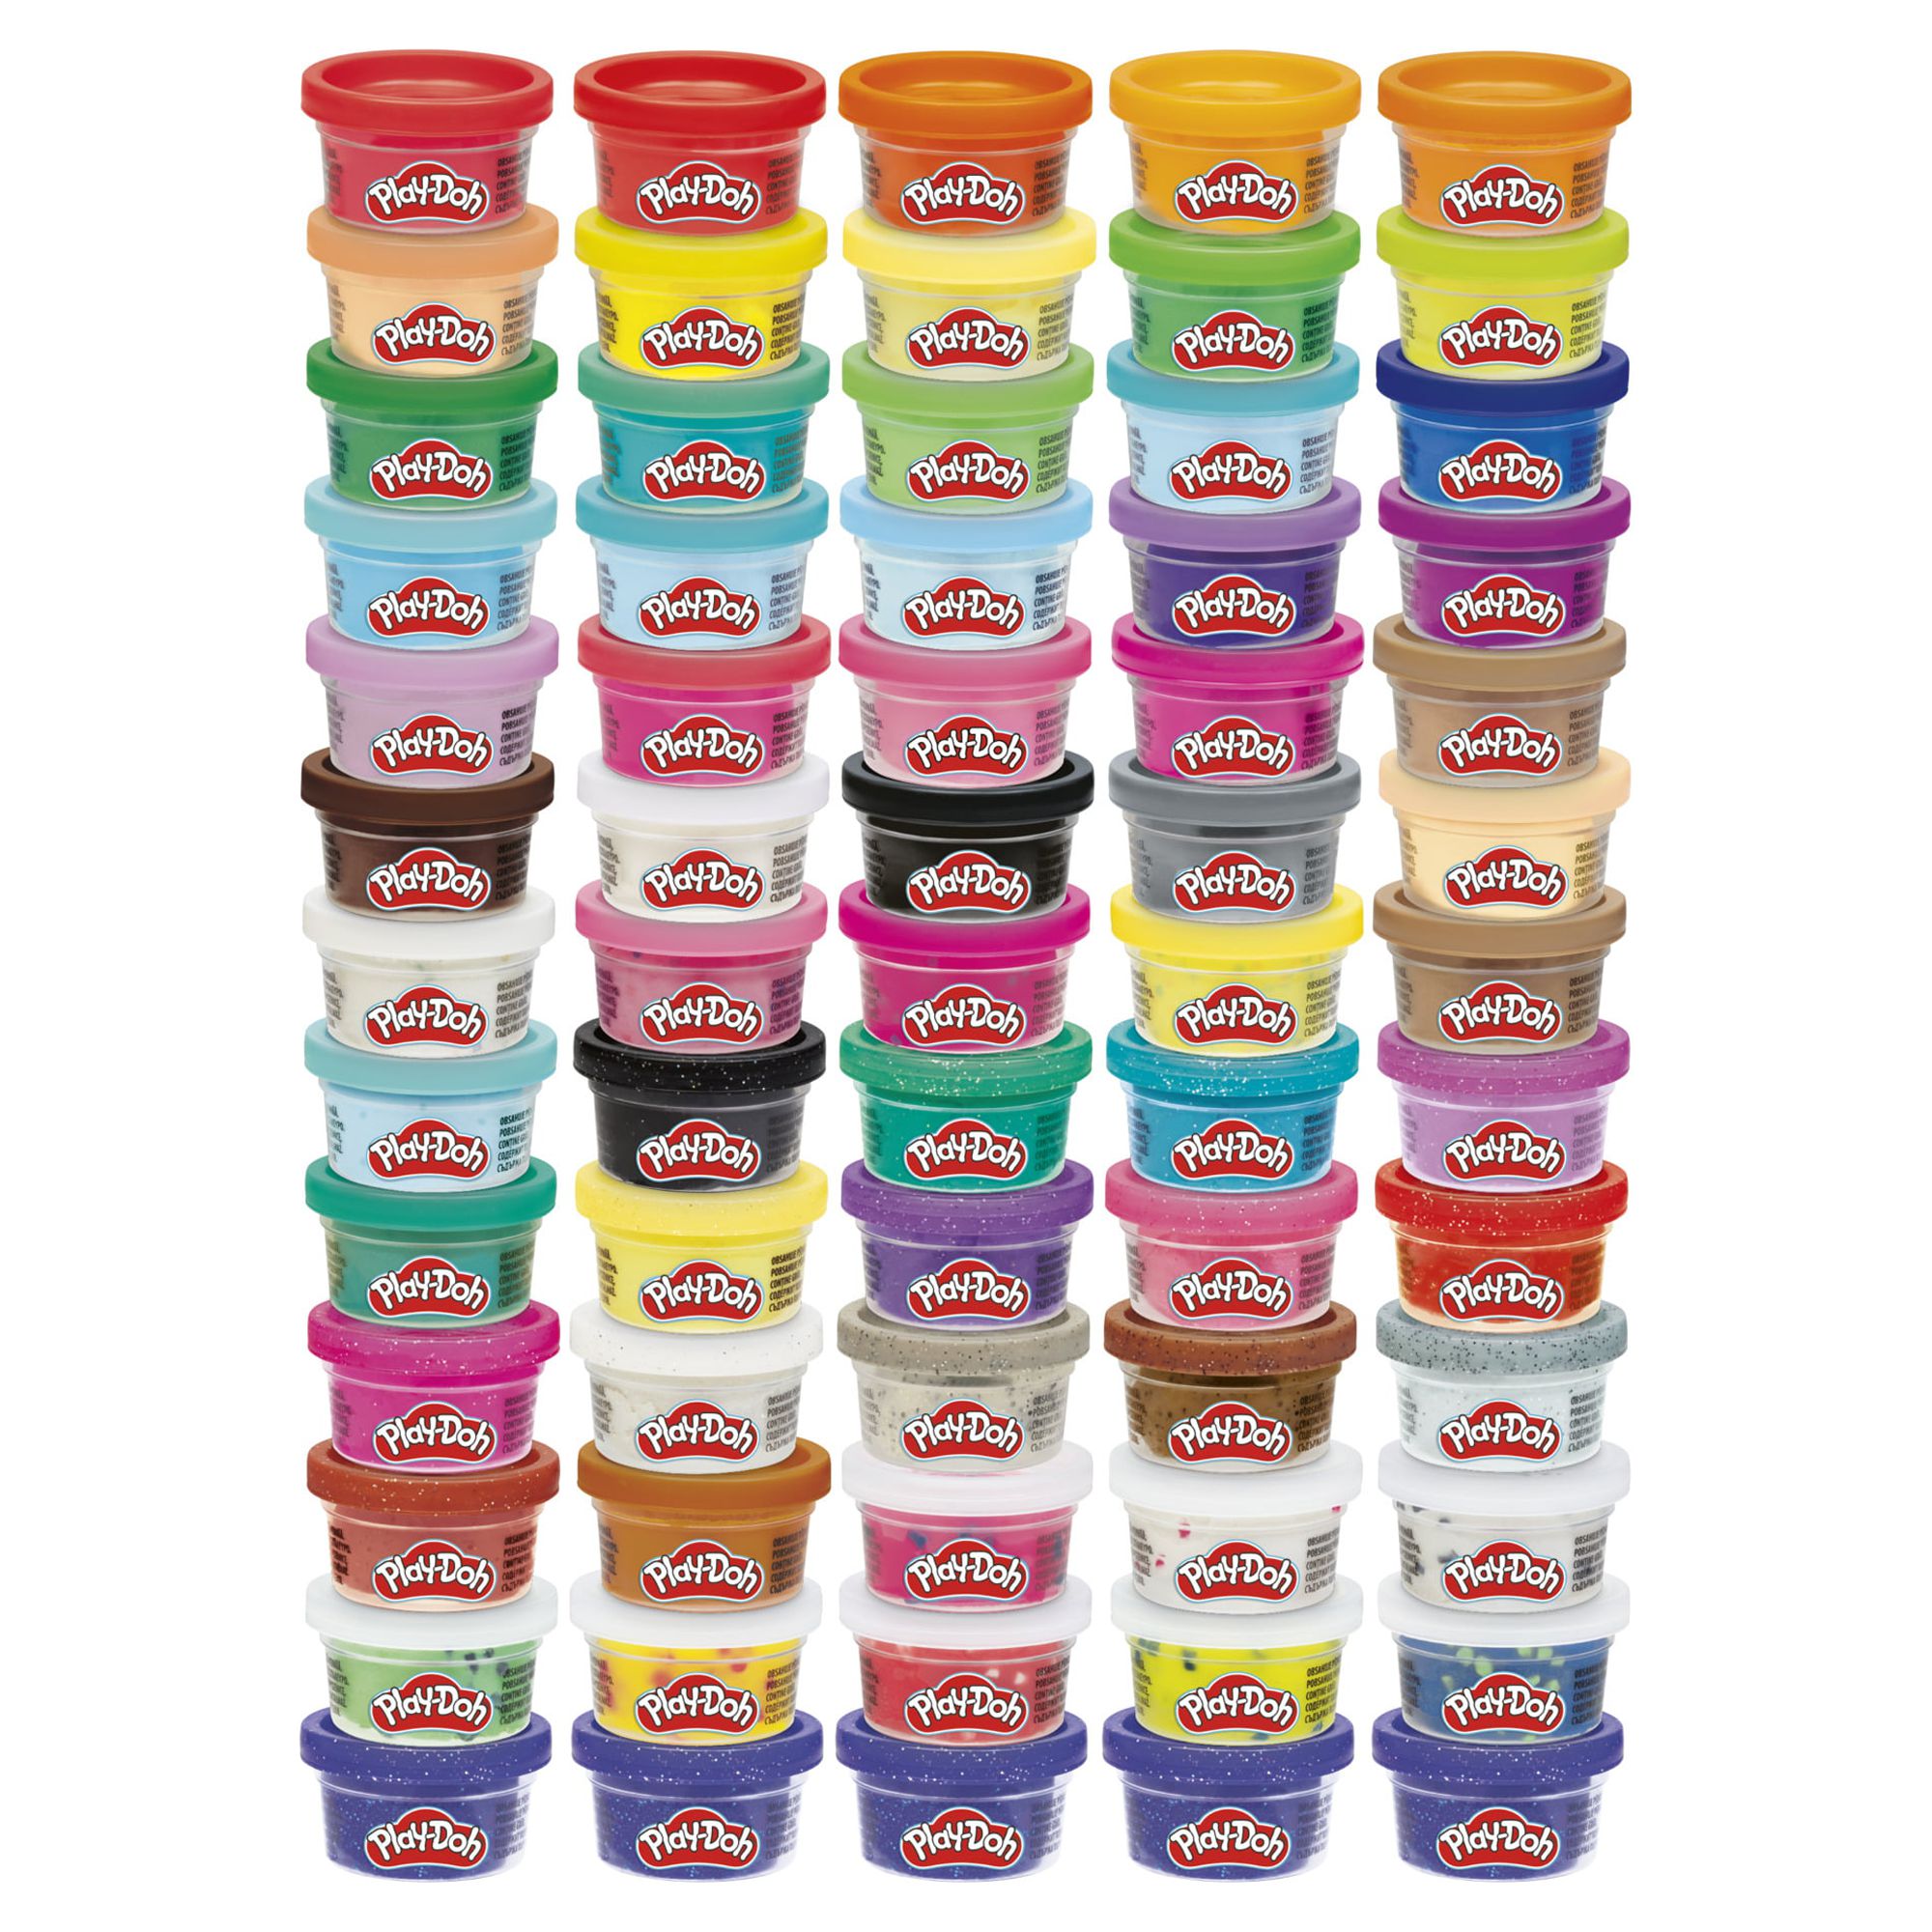 Play-Doh Ultimate Color Collection 65-Pack of Assorted 1-Ounce Cans - image 2 of 7